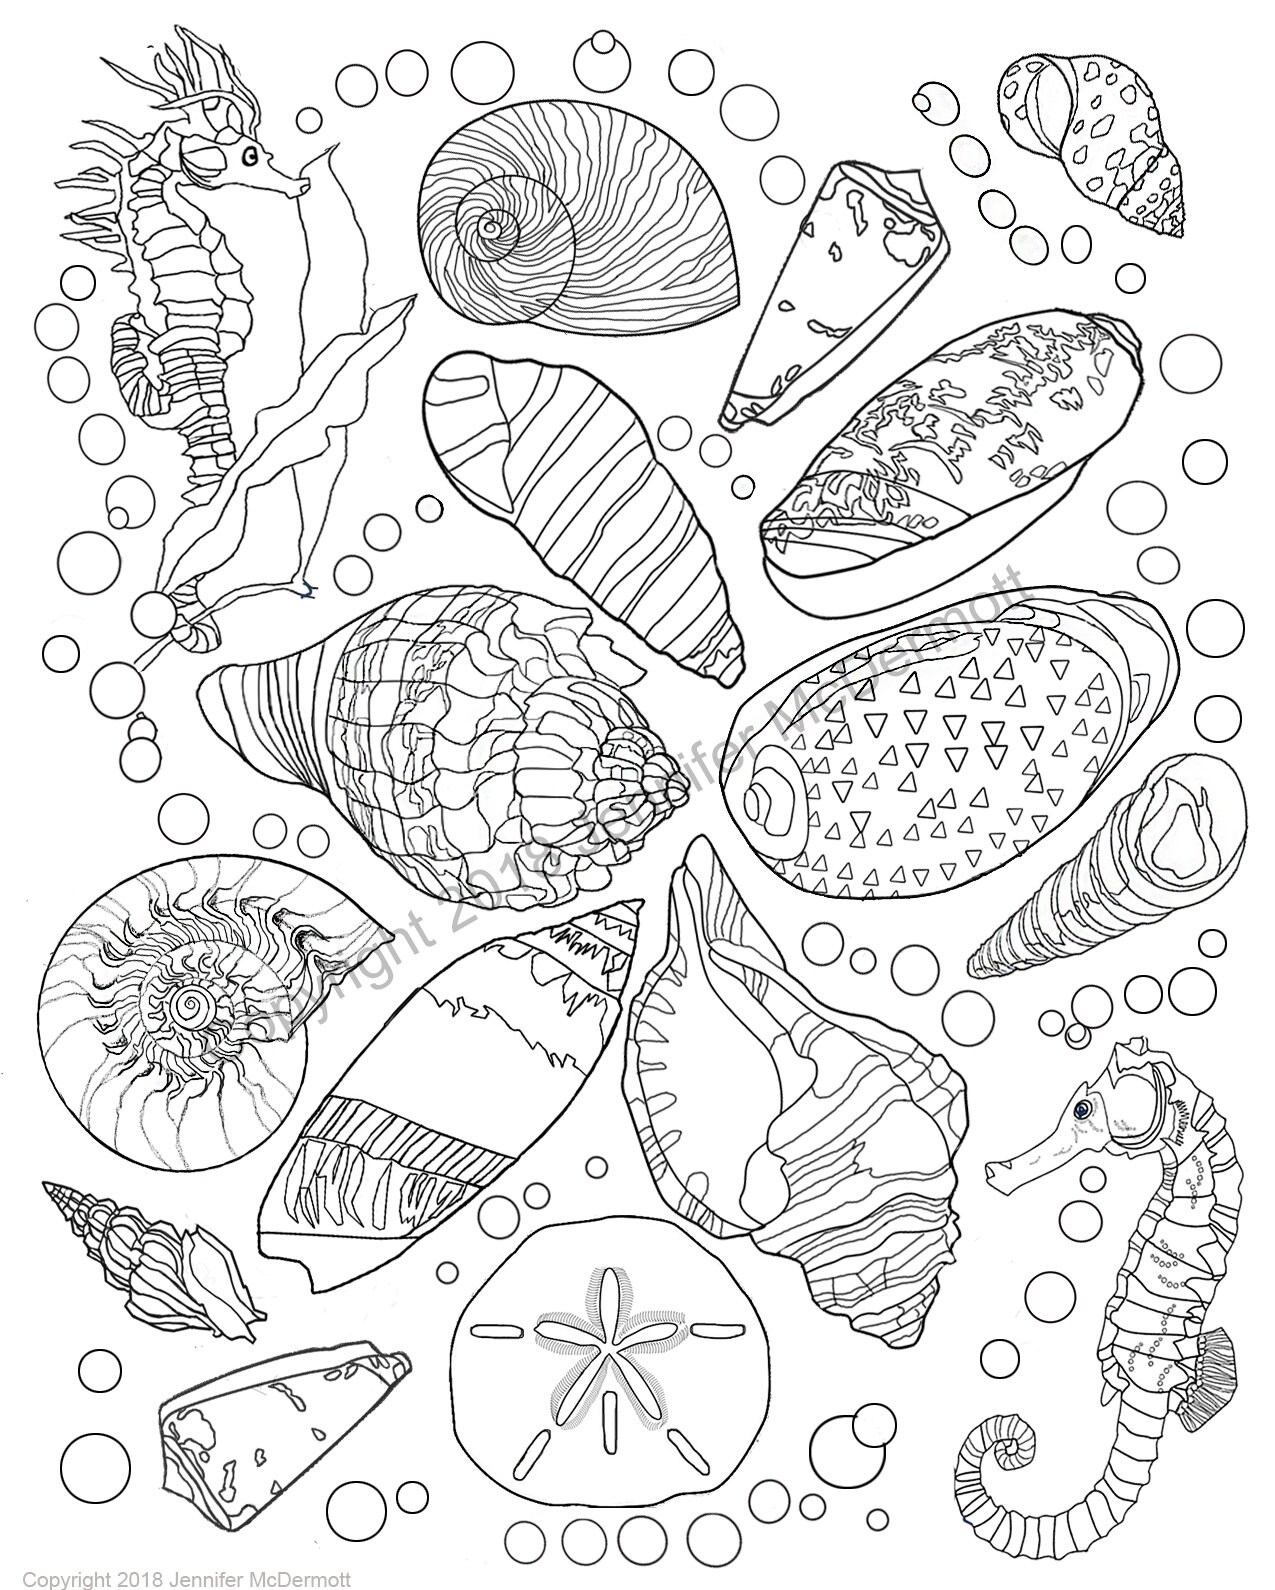 Coloring Page: Two Seahorses Flank 14 Seashells Floating - Etsy